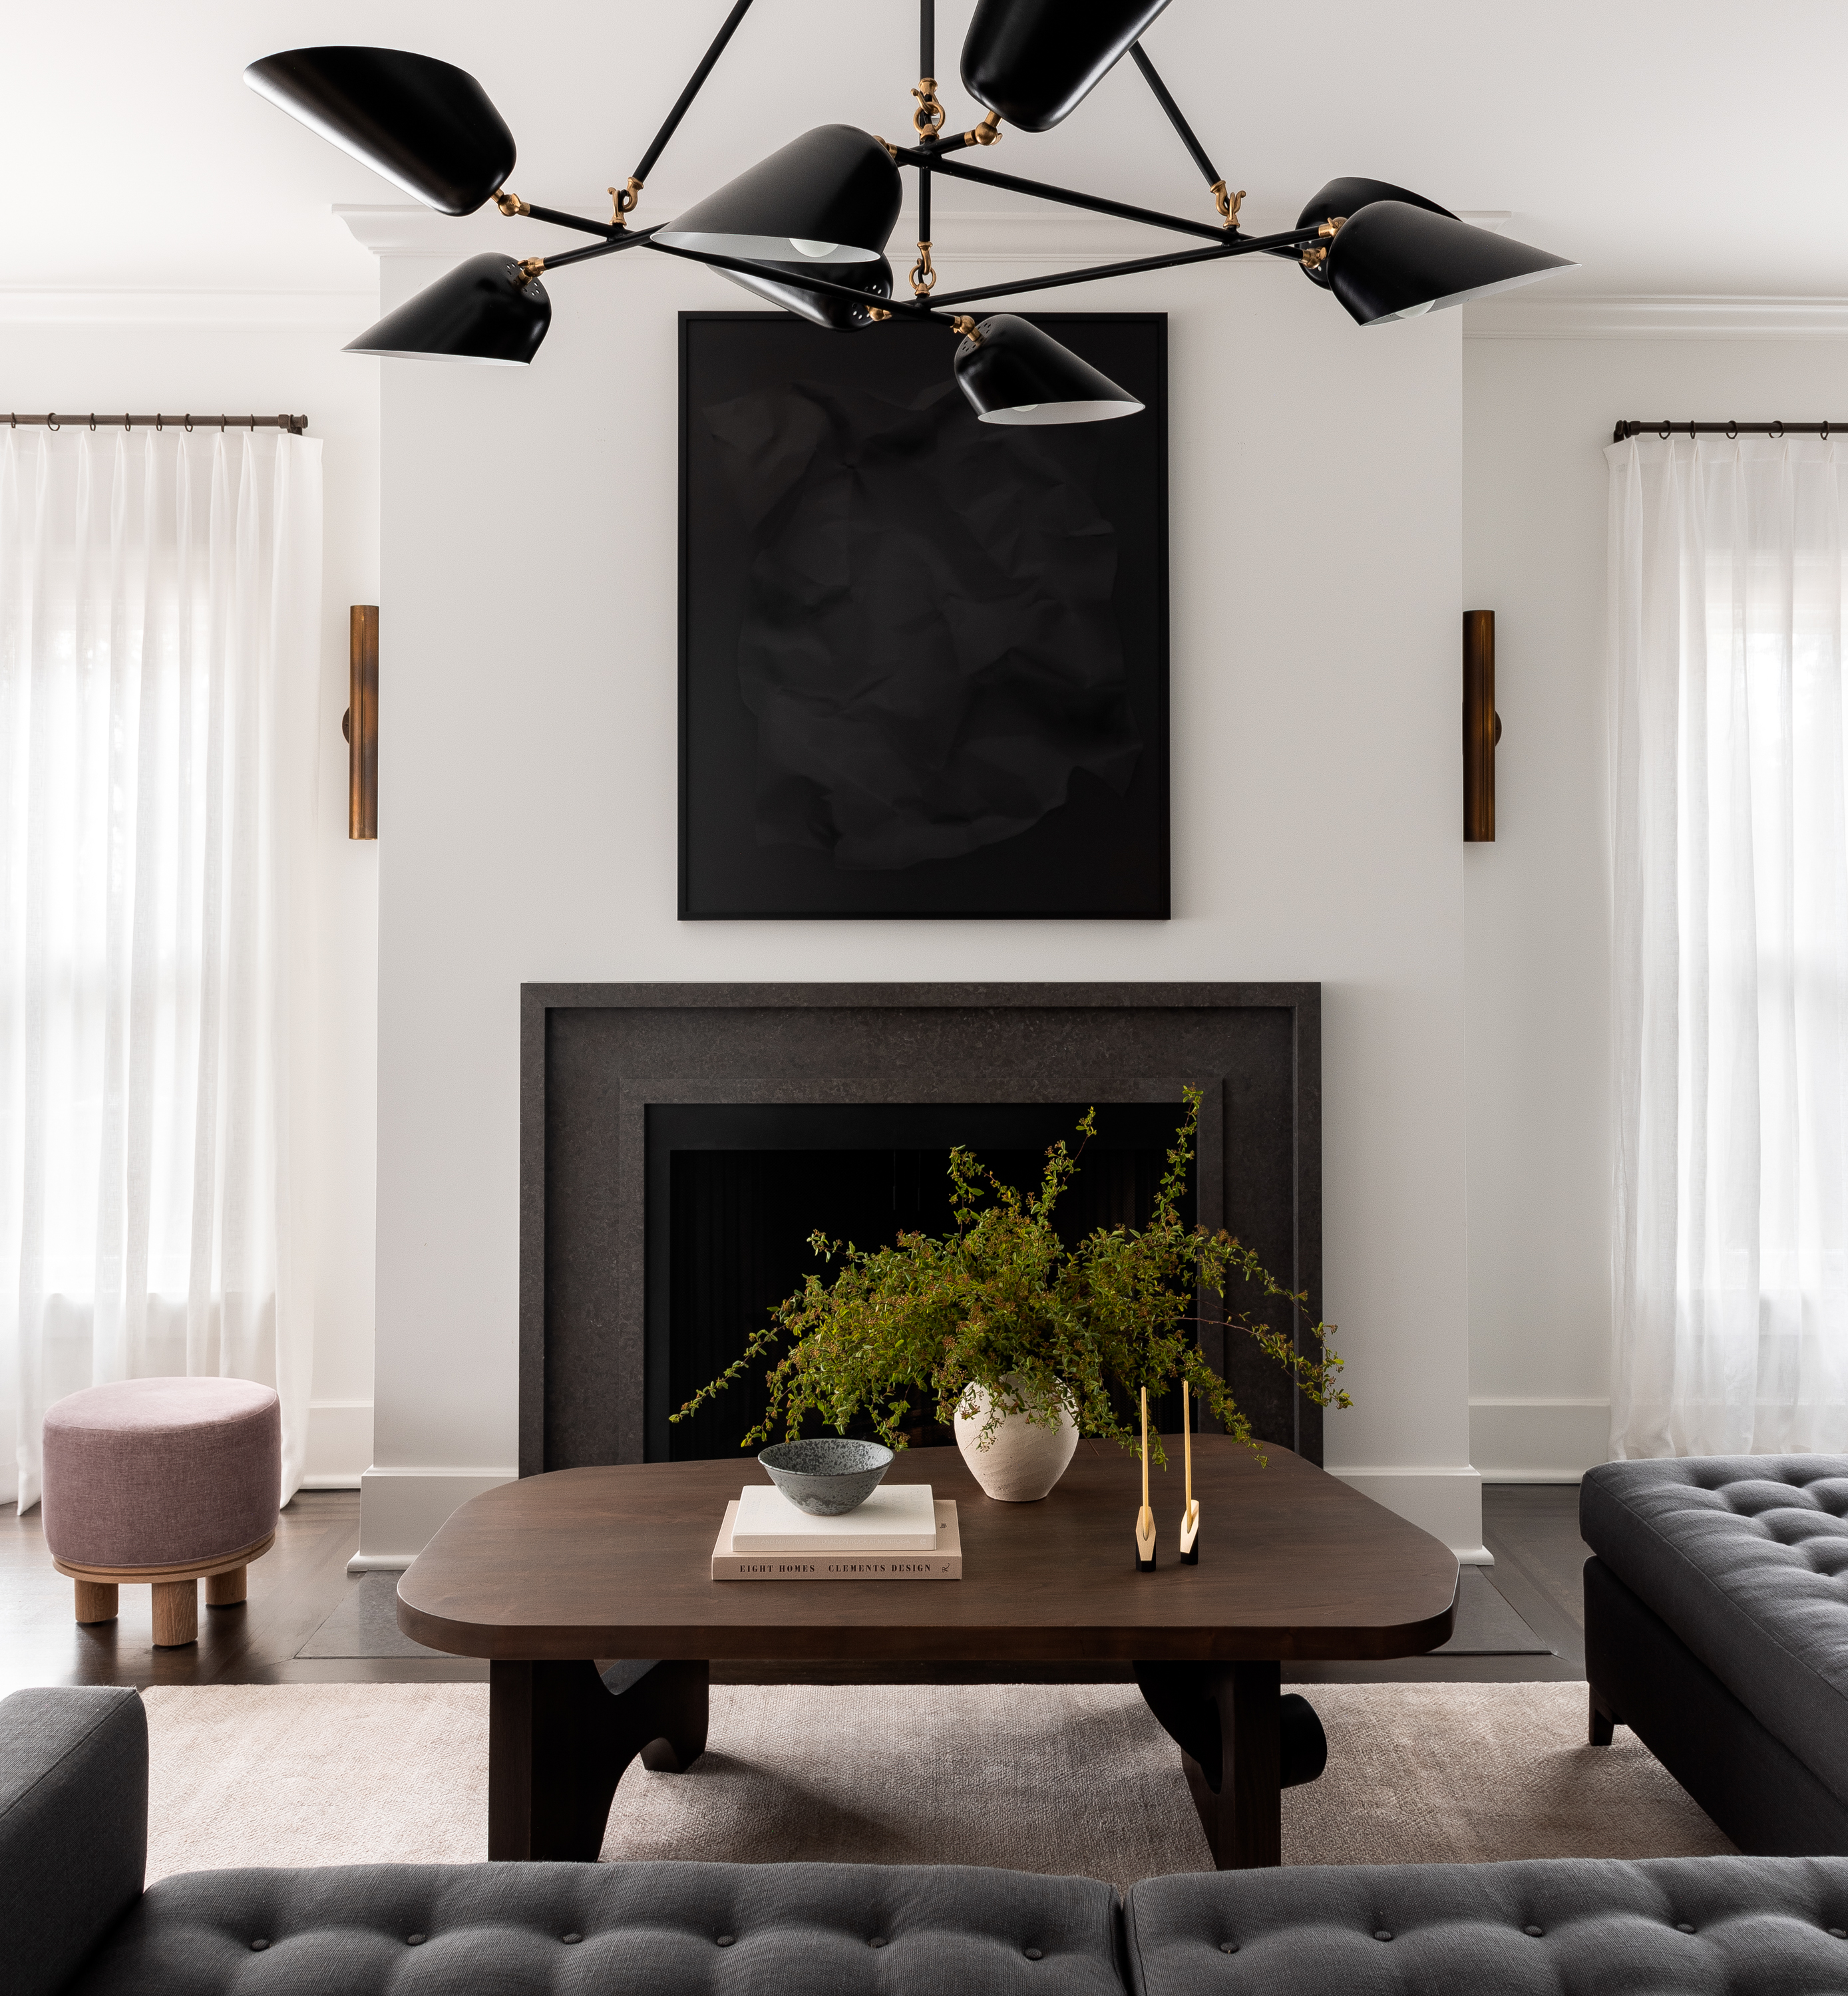 View of the fireplace in the Lake Park Residence renovation, featuring a charcoal-colored stone surround. Many items in this shot are black and charcoal, besides the white walls and white antique rug.